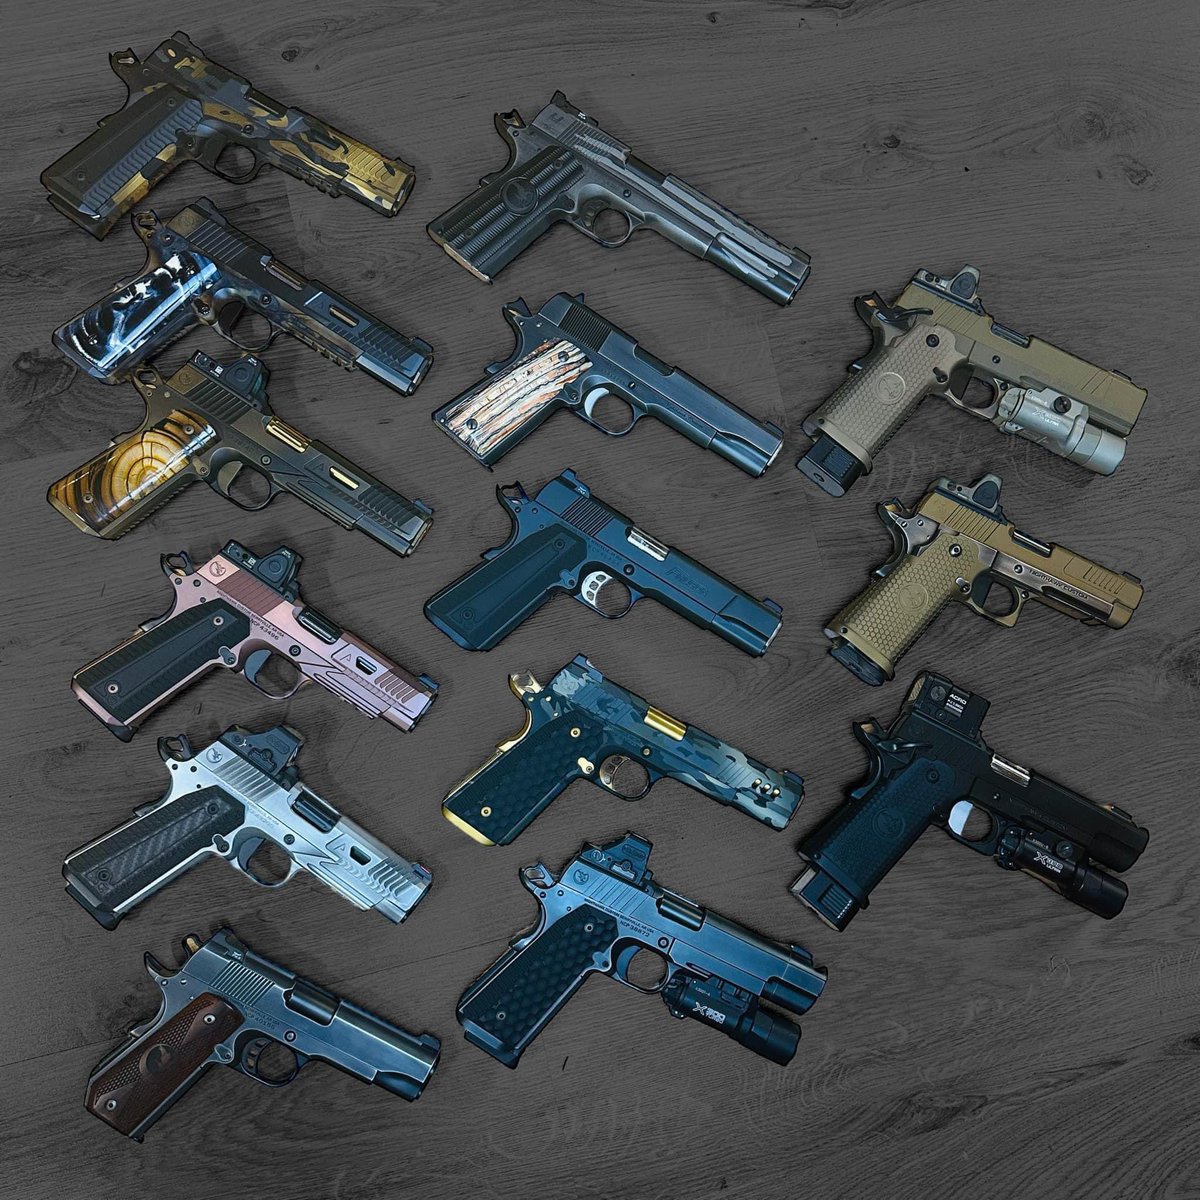 Check out this Nighthawk Custom collection! What’s your favorite? PC: Josh C